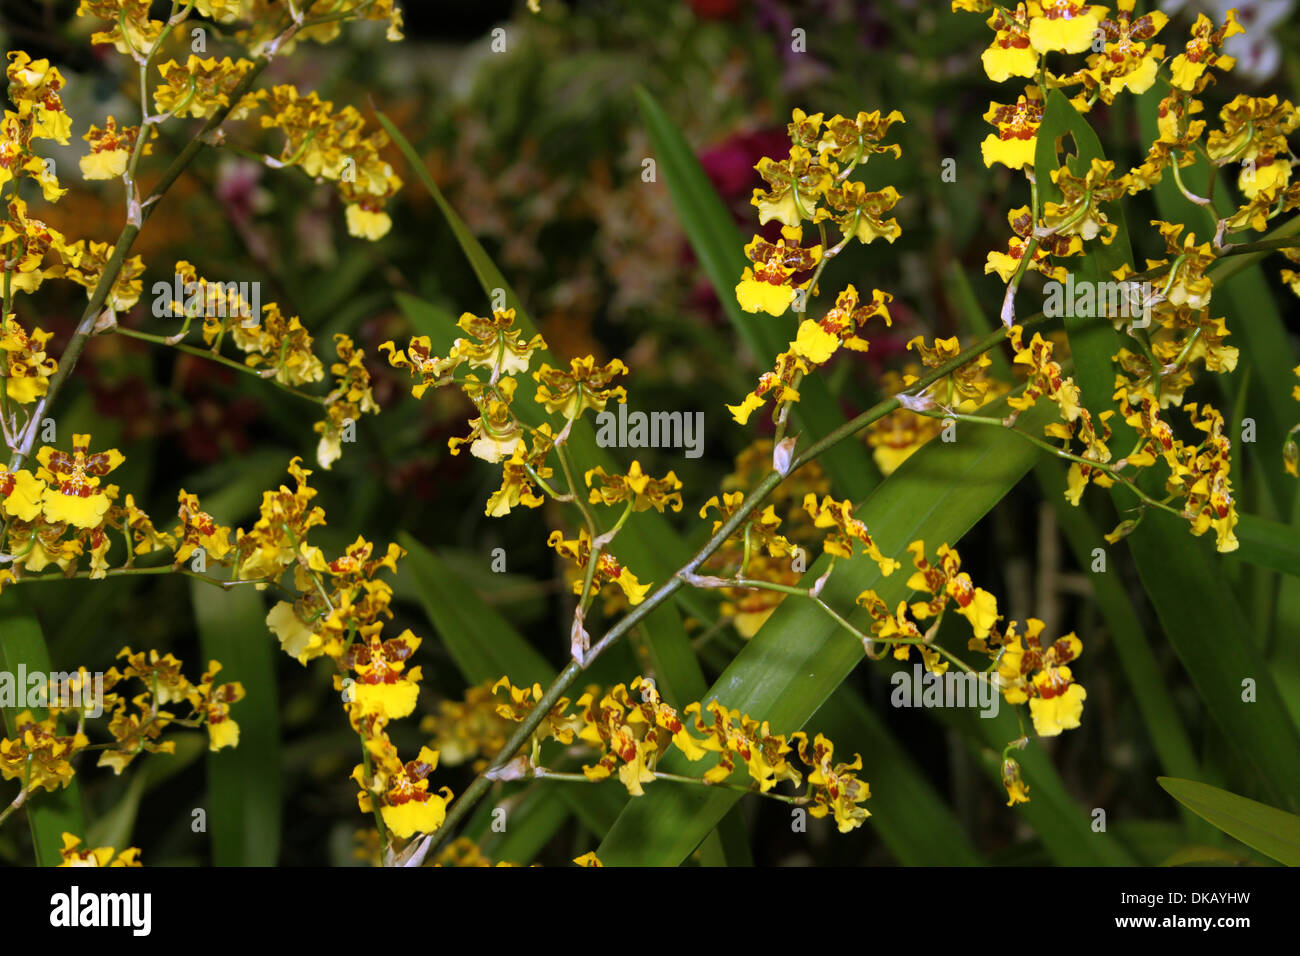 Colorful Orchid Species Oncidium Golden Anniversary Bright Yellow and Brown Picture Stock Photo